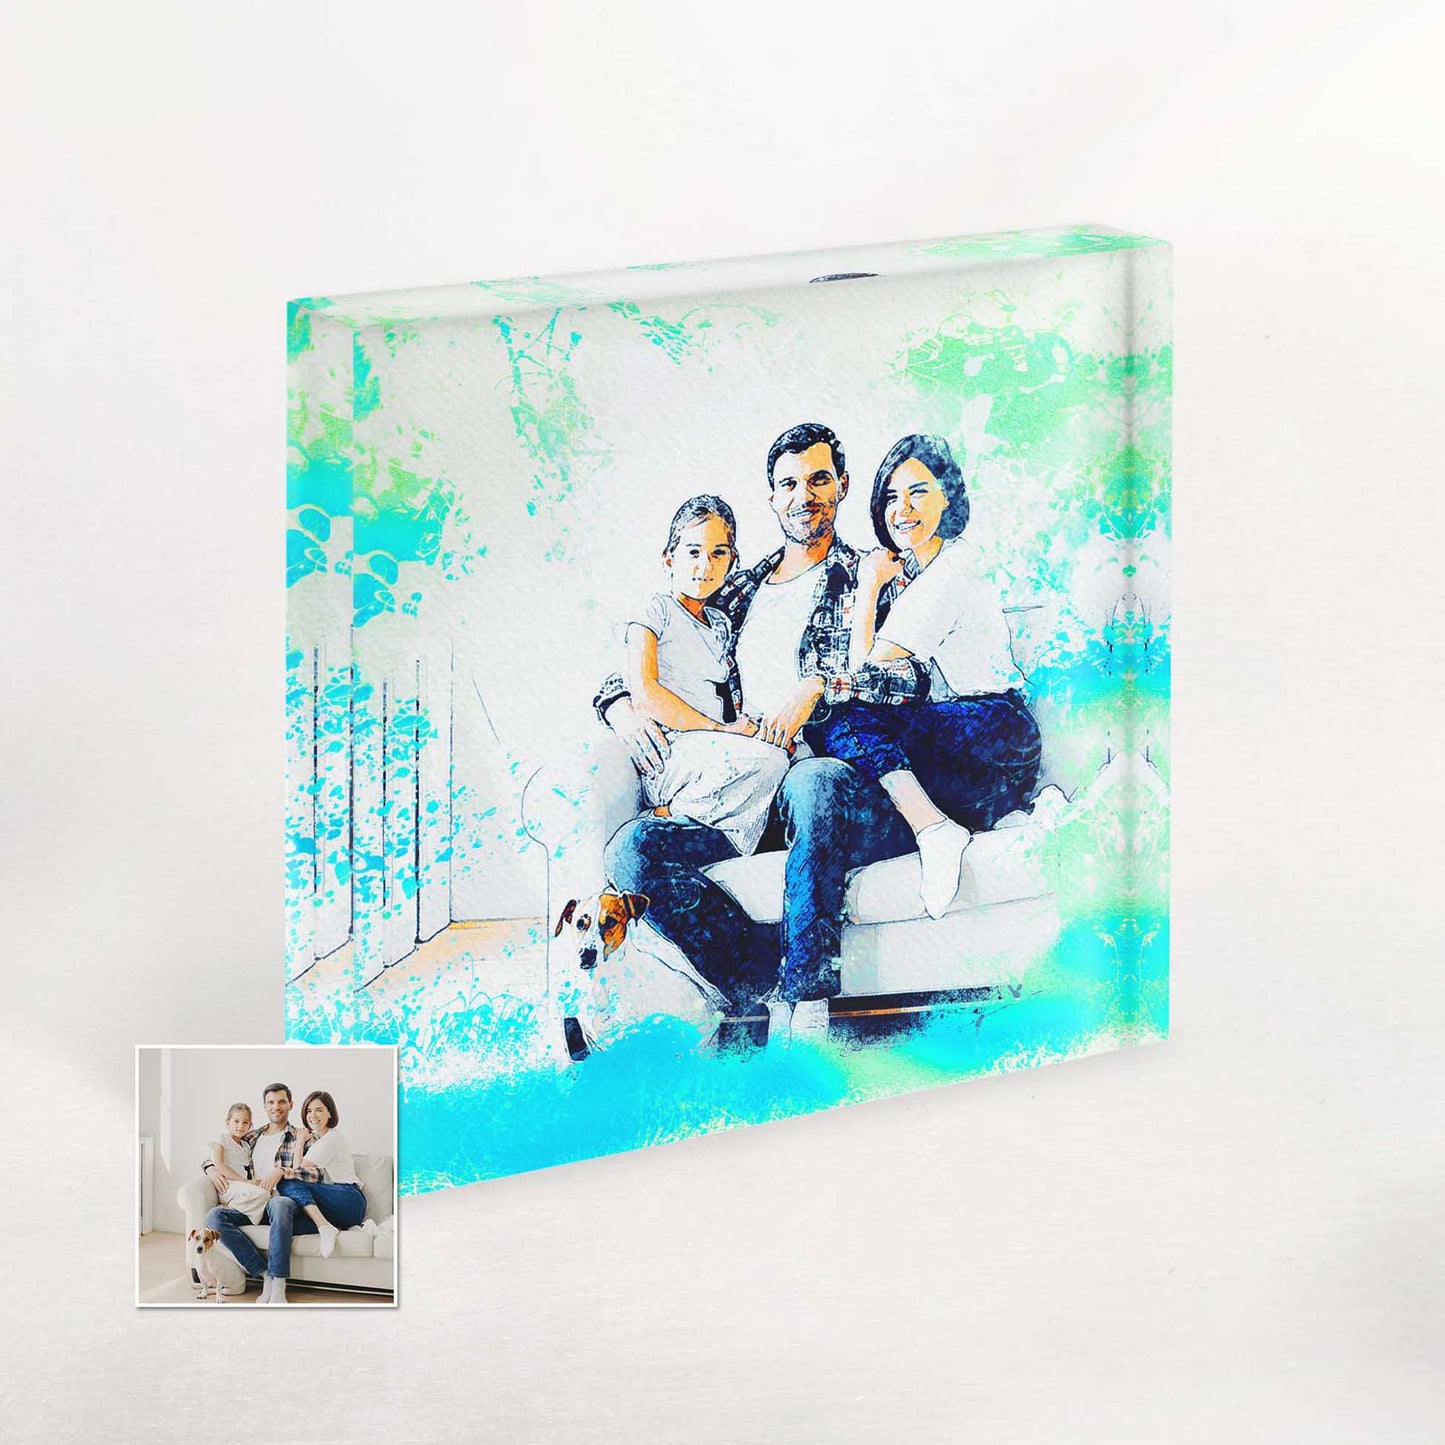 Celebrate love and creativity with our Personalised Splash Watercolor Acrylic Block Photo. The vibrant splash effect and personalized details make it a unique and inspirational addition to your home decor